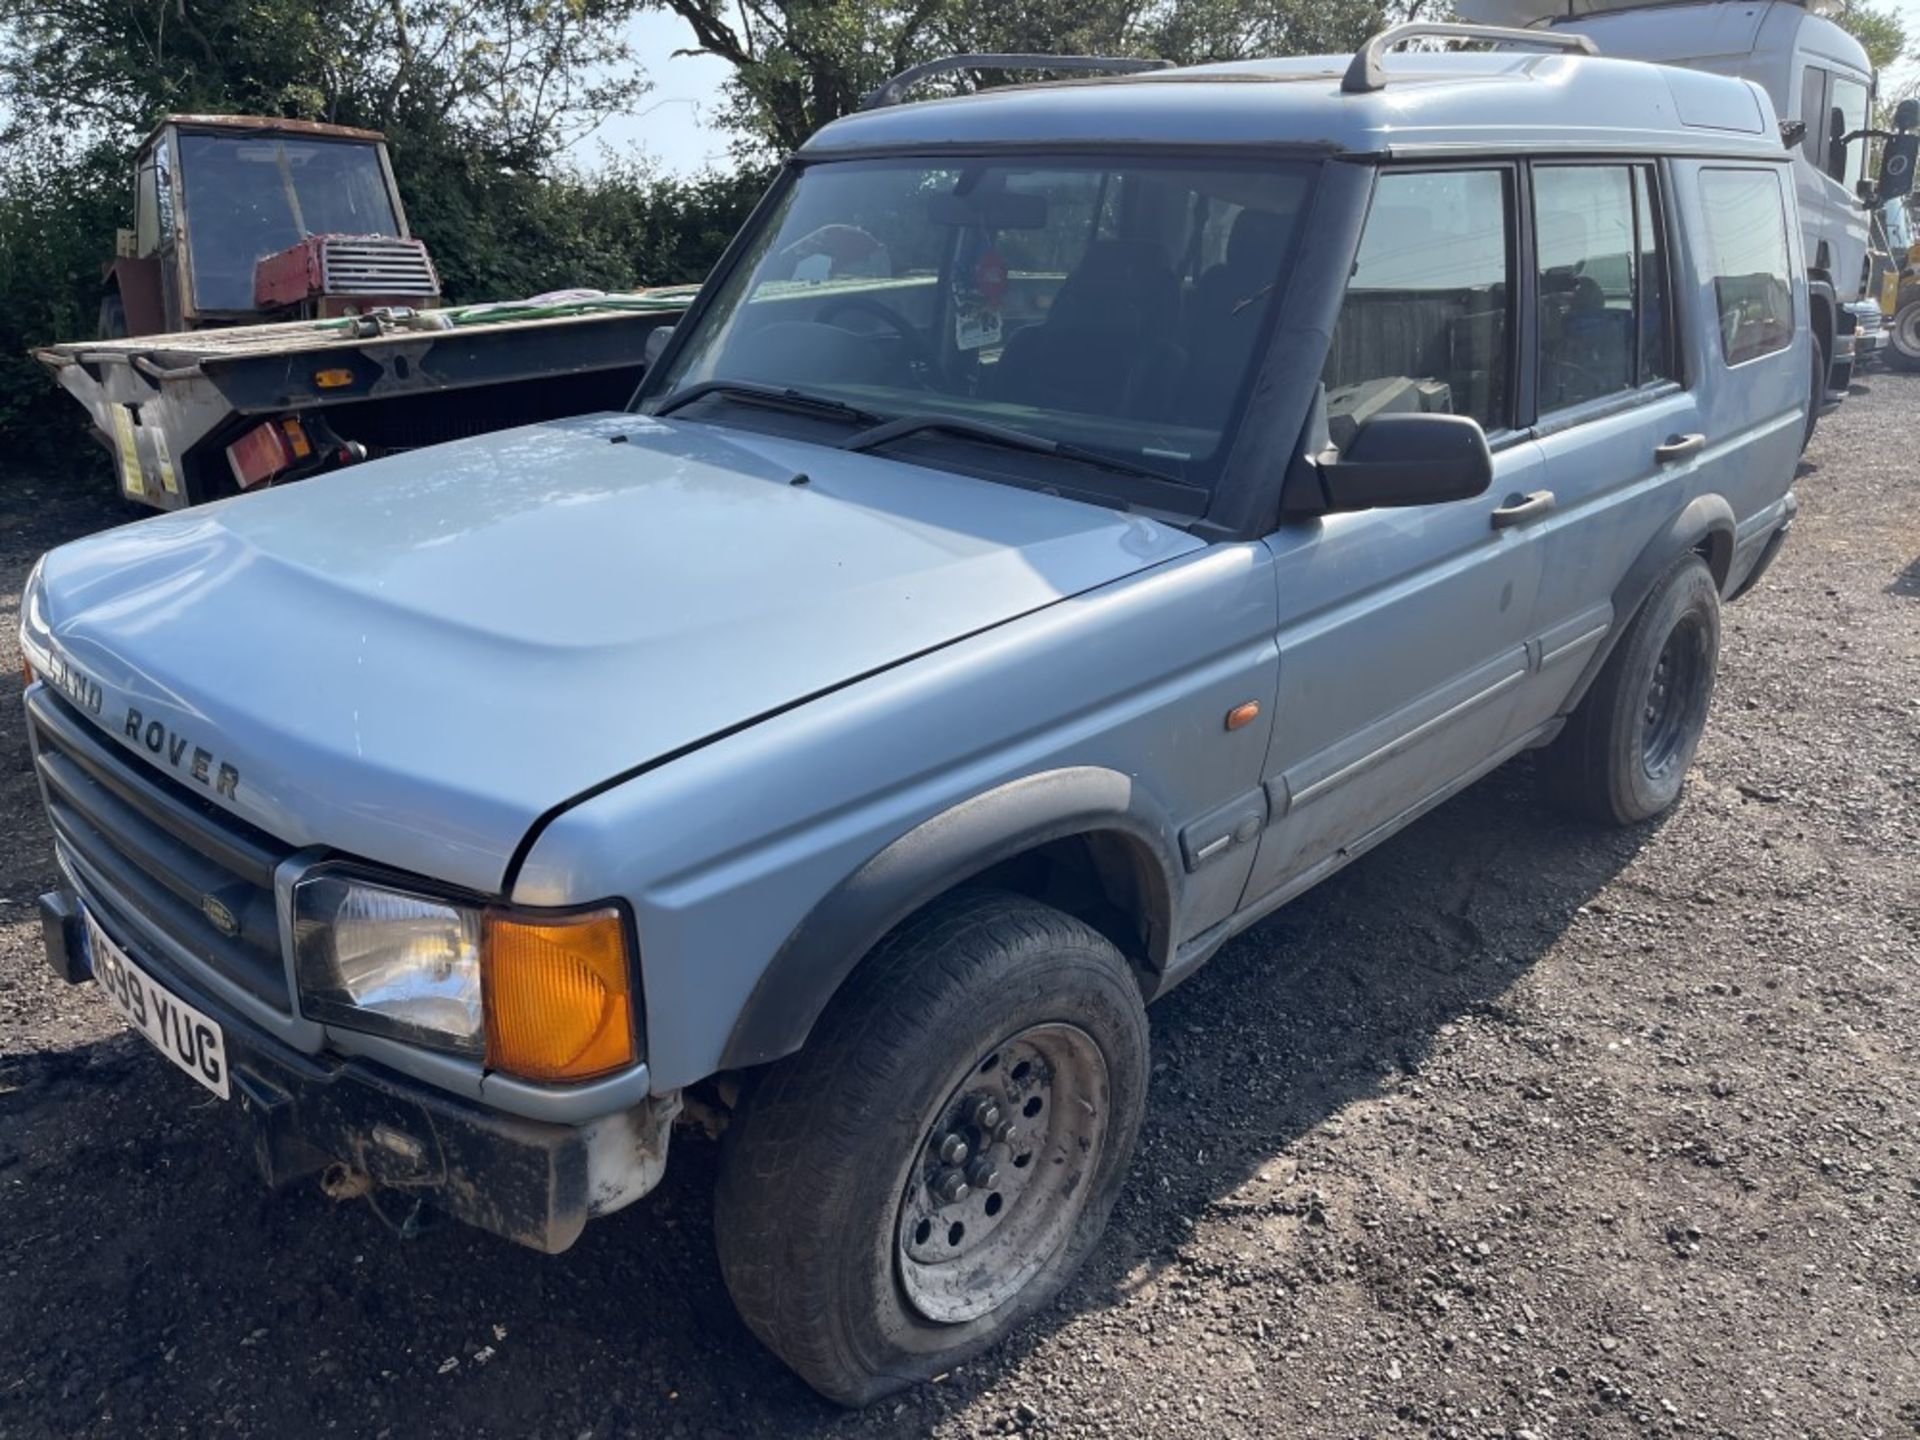 W reg LAND ROVER DISCOVERY (LOCATION BLACKBURN) NO KEYS SO UKNOWN IF RUNS OR NOT, NO V5 (RING FOR